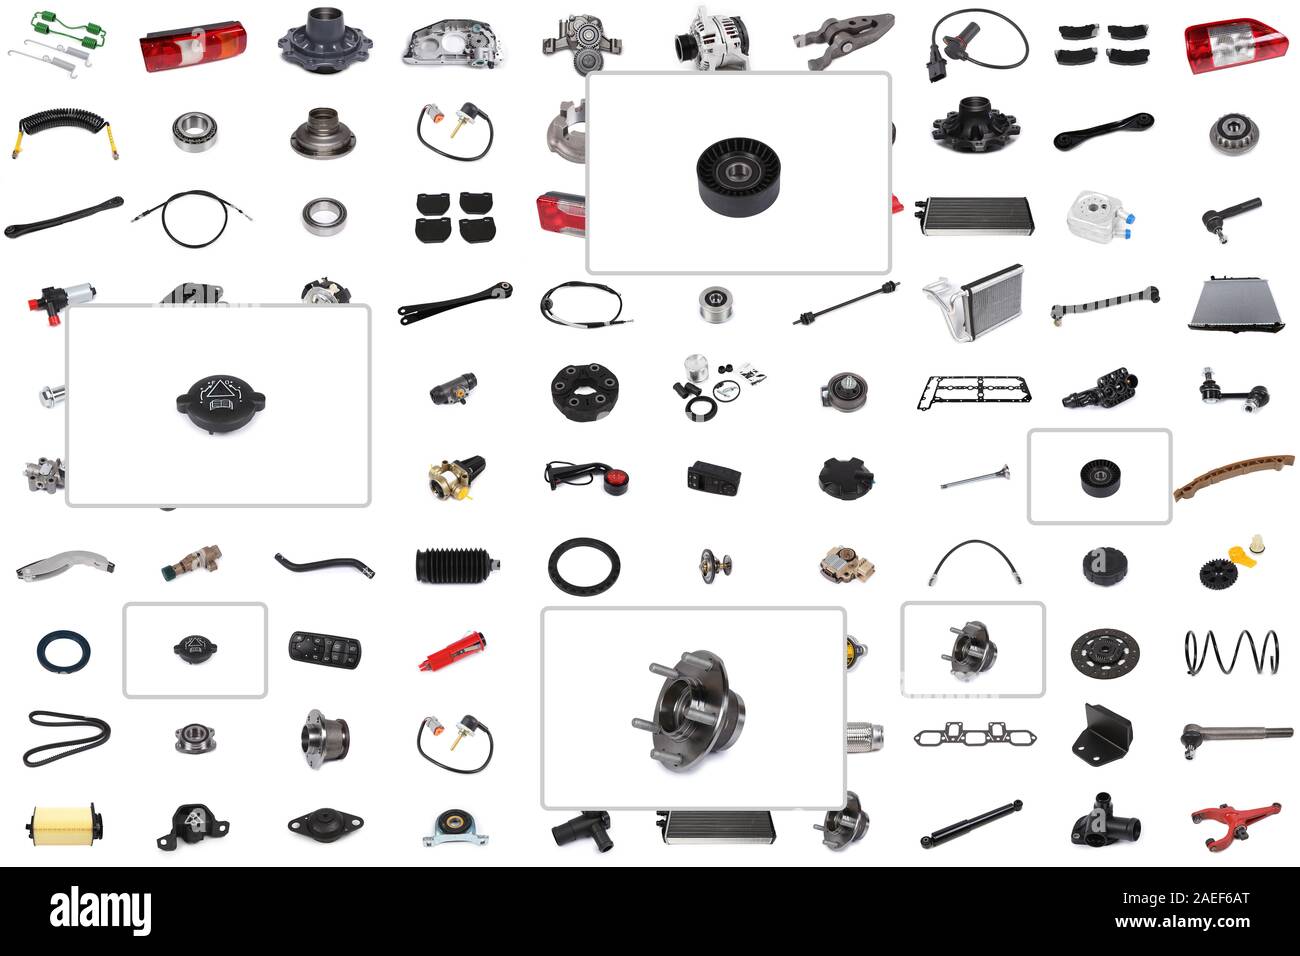 Collage of various auto parts for cars and trucks with an emphasis